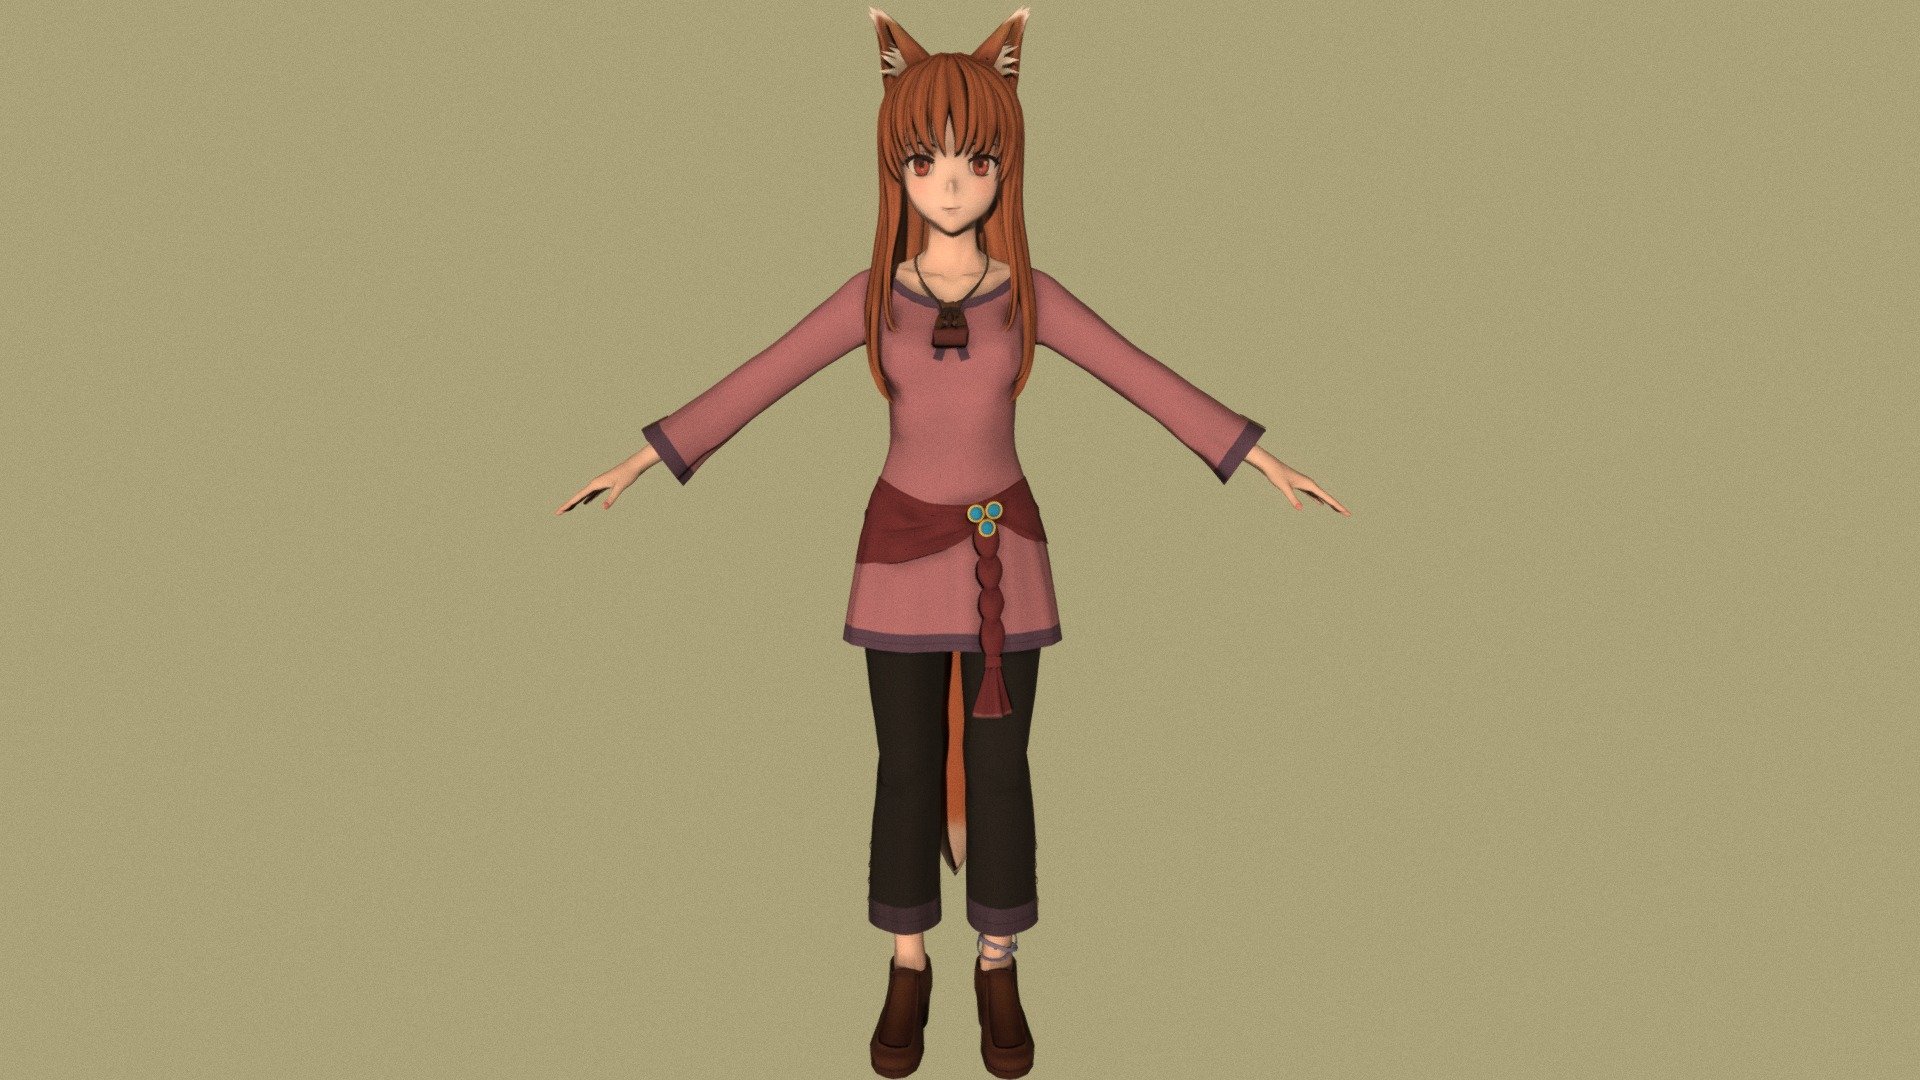 T-pose rigged model of anime girl Horo (Spice and Wolf).

Body and clothings are rigged and skinned by 3ds Max CAT system.

Eye direction and facial animation controlled by Morpher modifier / Shape Keys / Blendshape.

This product include .FBX (ver. 7200) and .MAX (ver. 2010) files.

3ds Max version is turbosmoothed to give a high quality render (as you can see here).

Original main body mesh have ~7.000 polys.

This 3D model may need some tweaking to adapt the rig system to games engine and other platforms.

I support convert model to various file formats (the rig data will be lost in this process): 3DS; AI; ASE; DAE; DWF; DWG; DXF; FLT; HTR; IGS; M3G; MQO; OBJ; SAT; STL; W3D; WRL; X.

You can buy all of my models in one pack to save cost: https://sketchfab.com/3d-models/all-of-my-anime-girls-c5a56156994e4193b9e8fa21a3b8360b

And I can make commission models.

If you have any questions, please leave a comment or contact me via my email 3d.eden.project@gmail.com 3d model